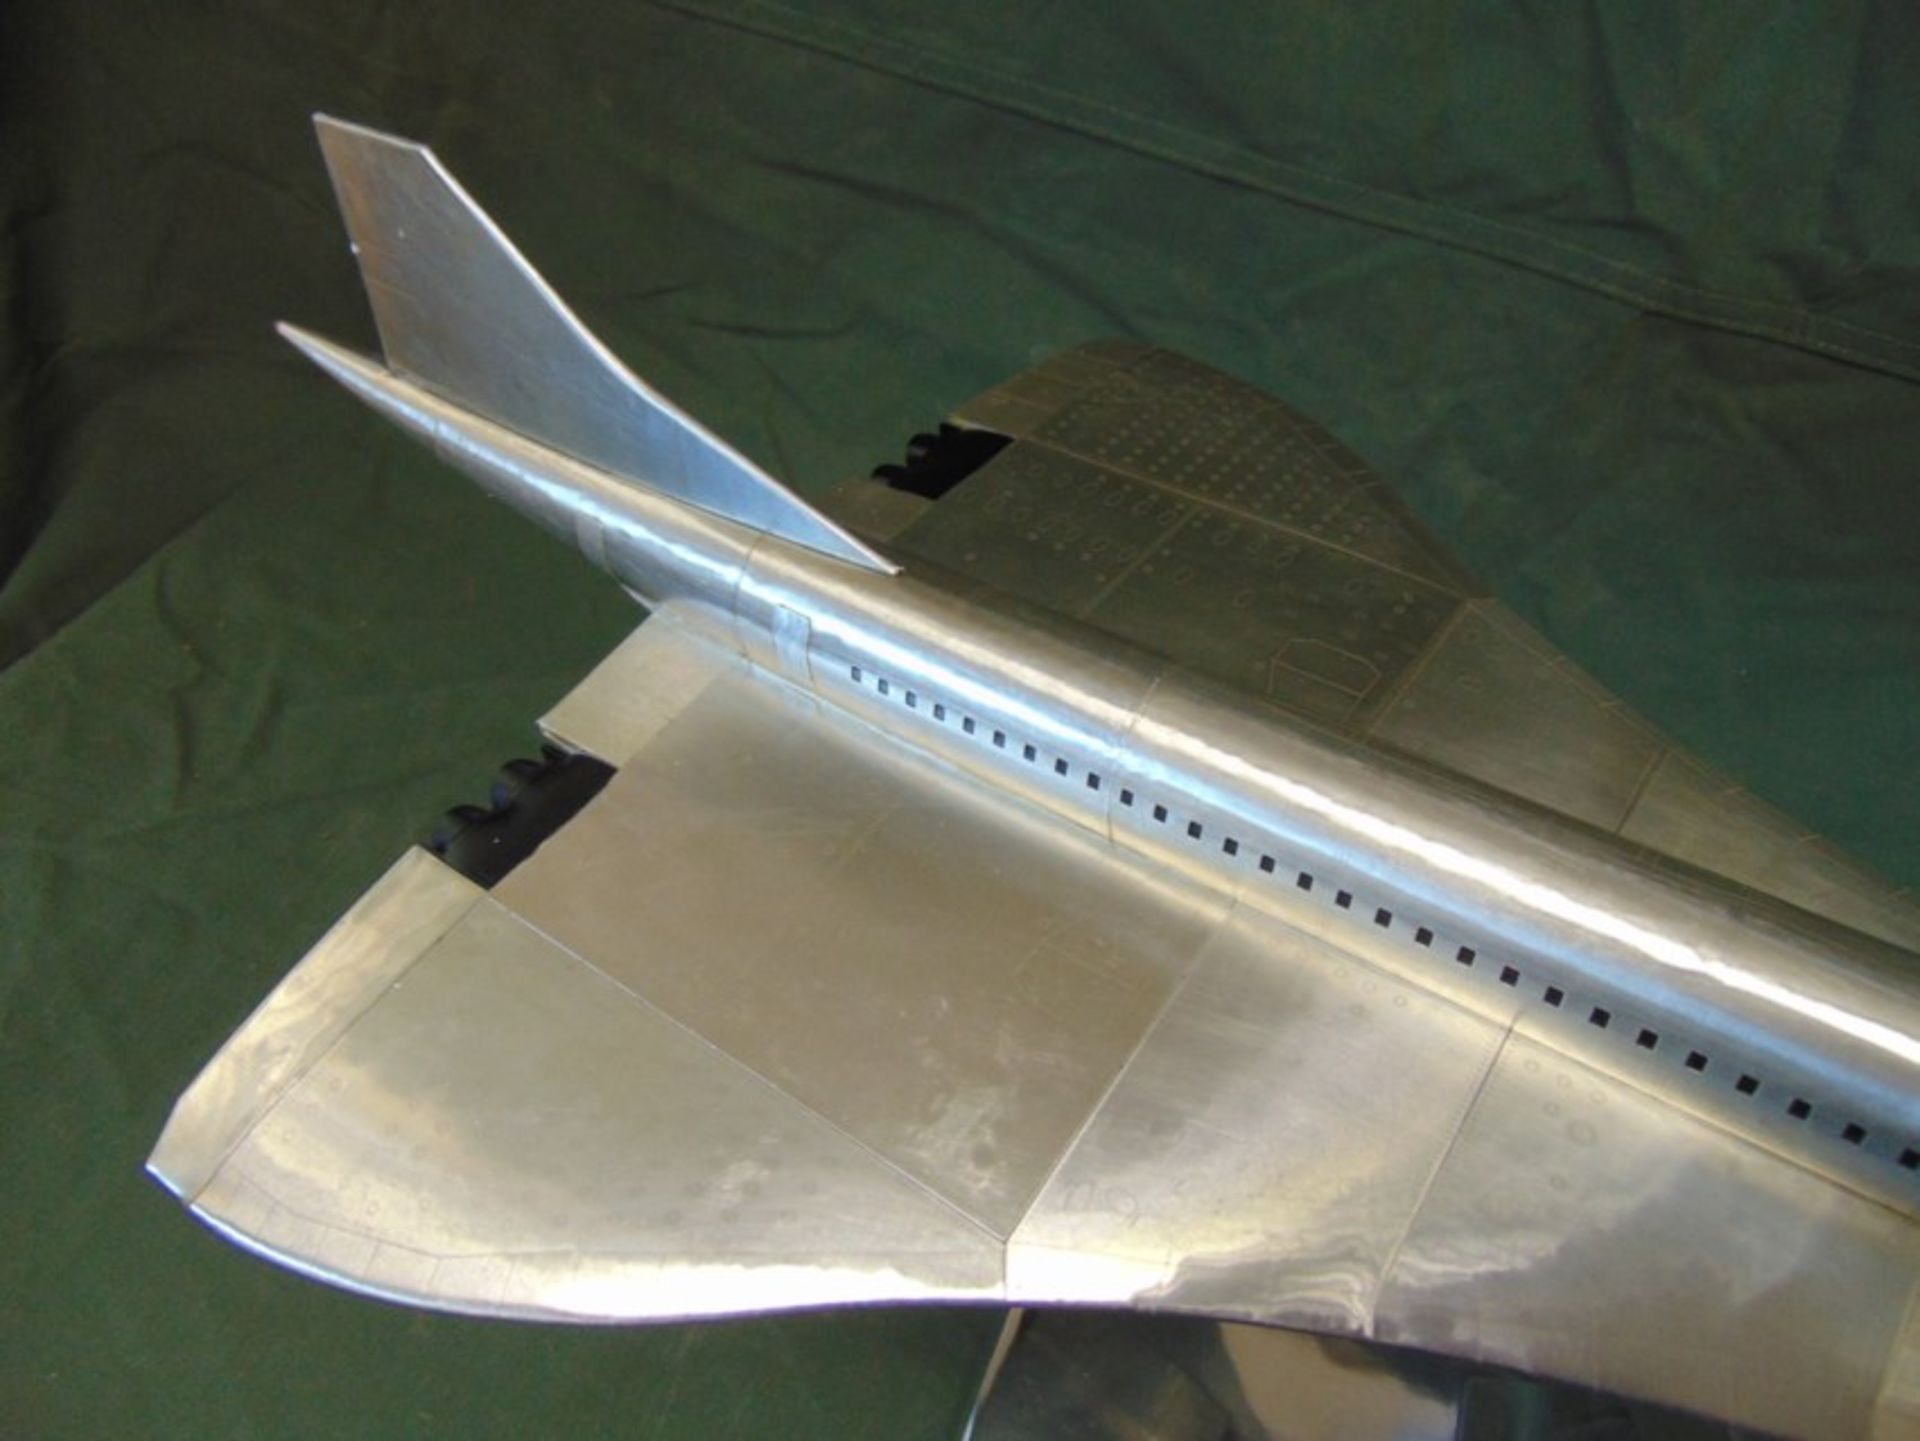 NEW JUST LANDED Large Aluminium Concorde Model - Image 8 of 14